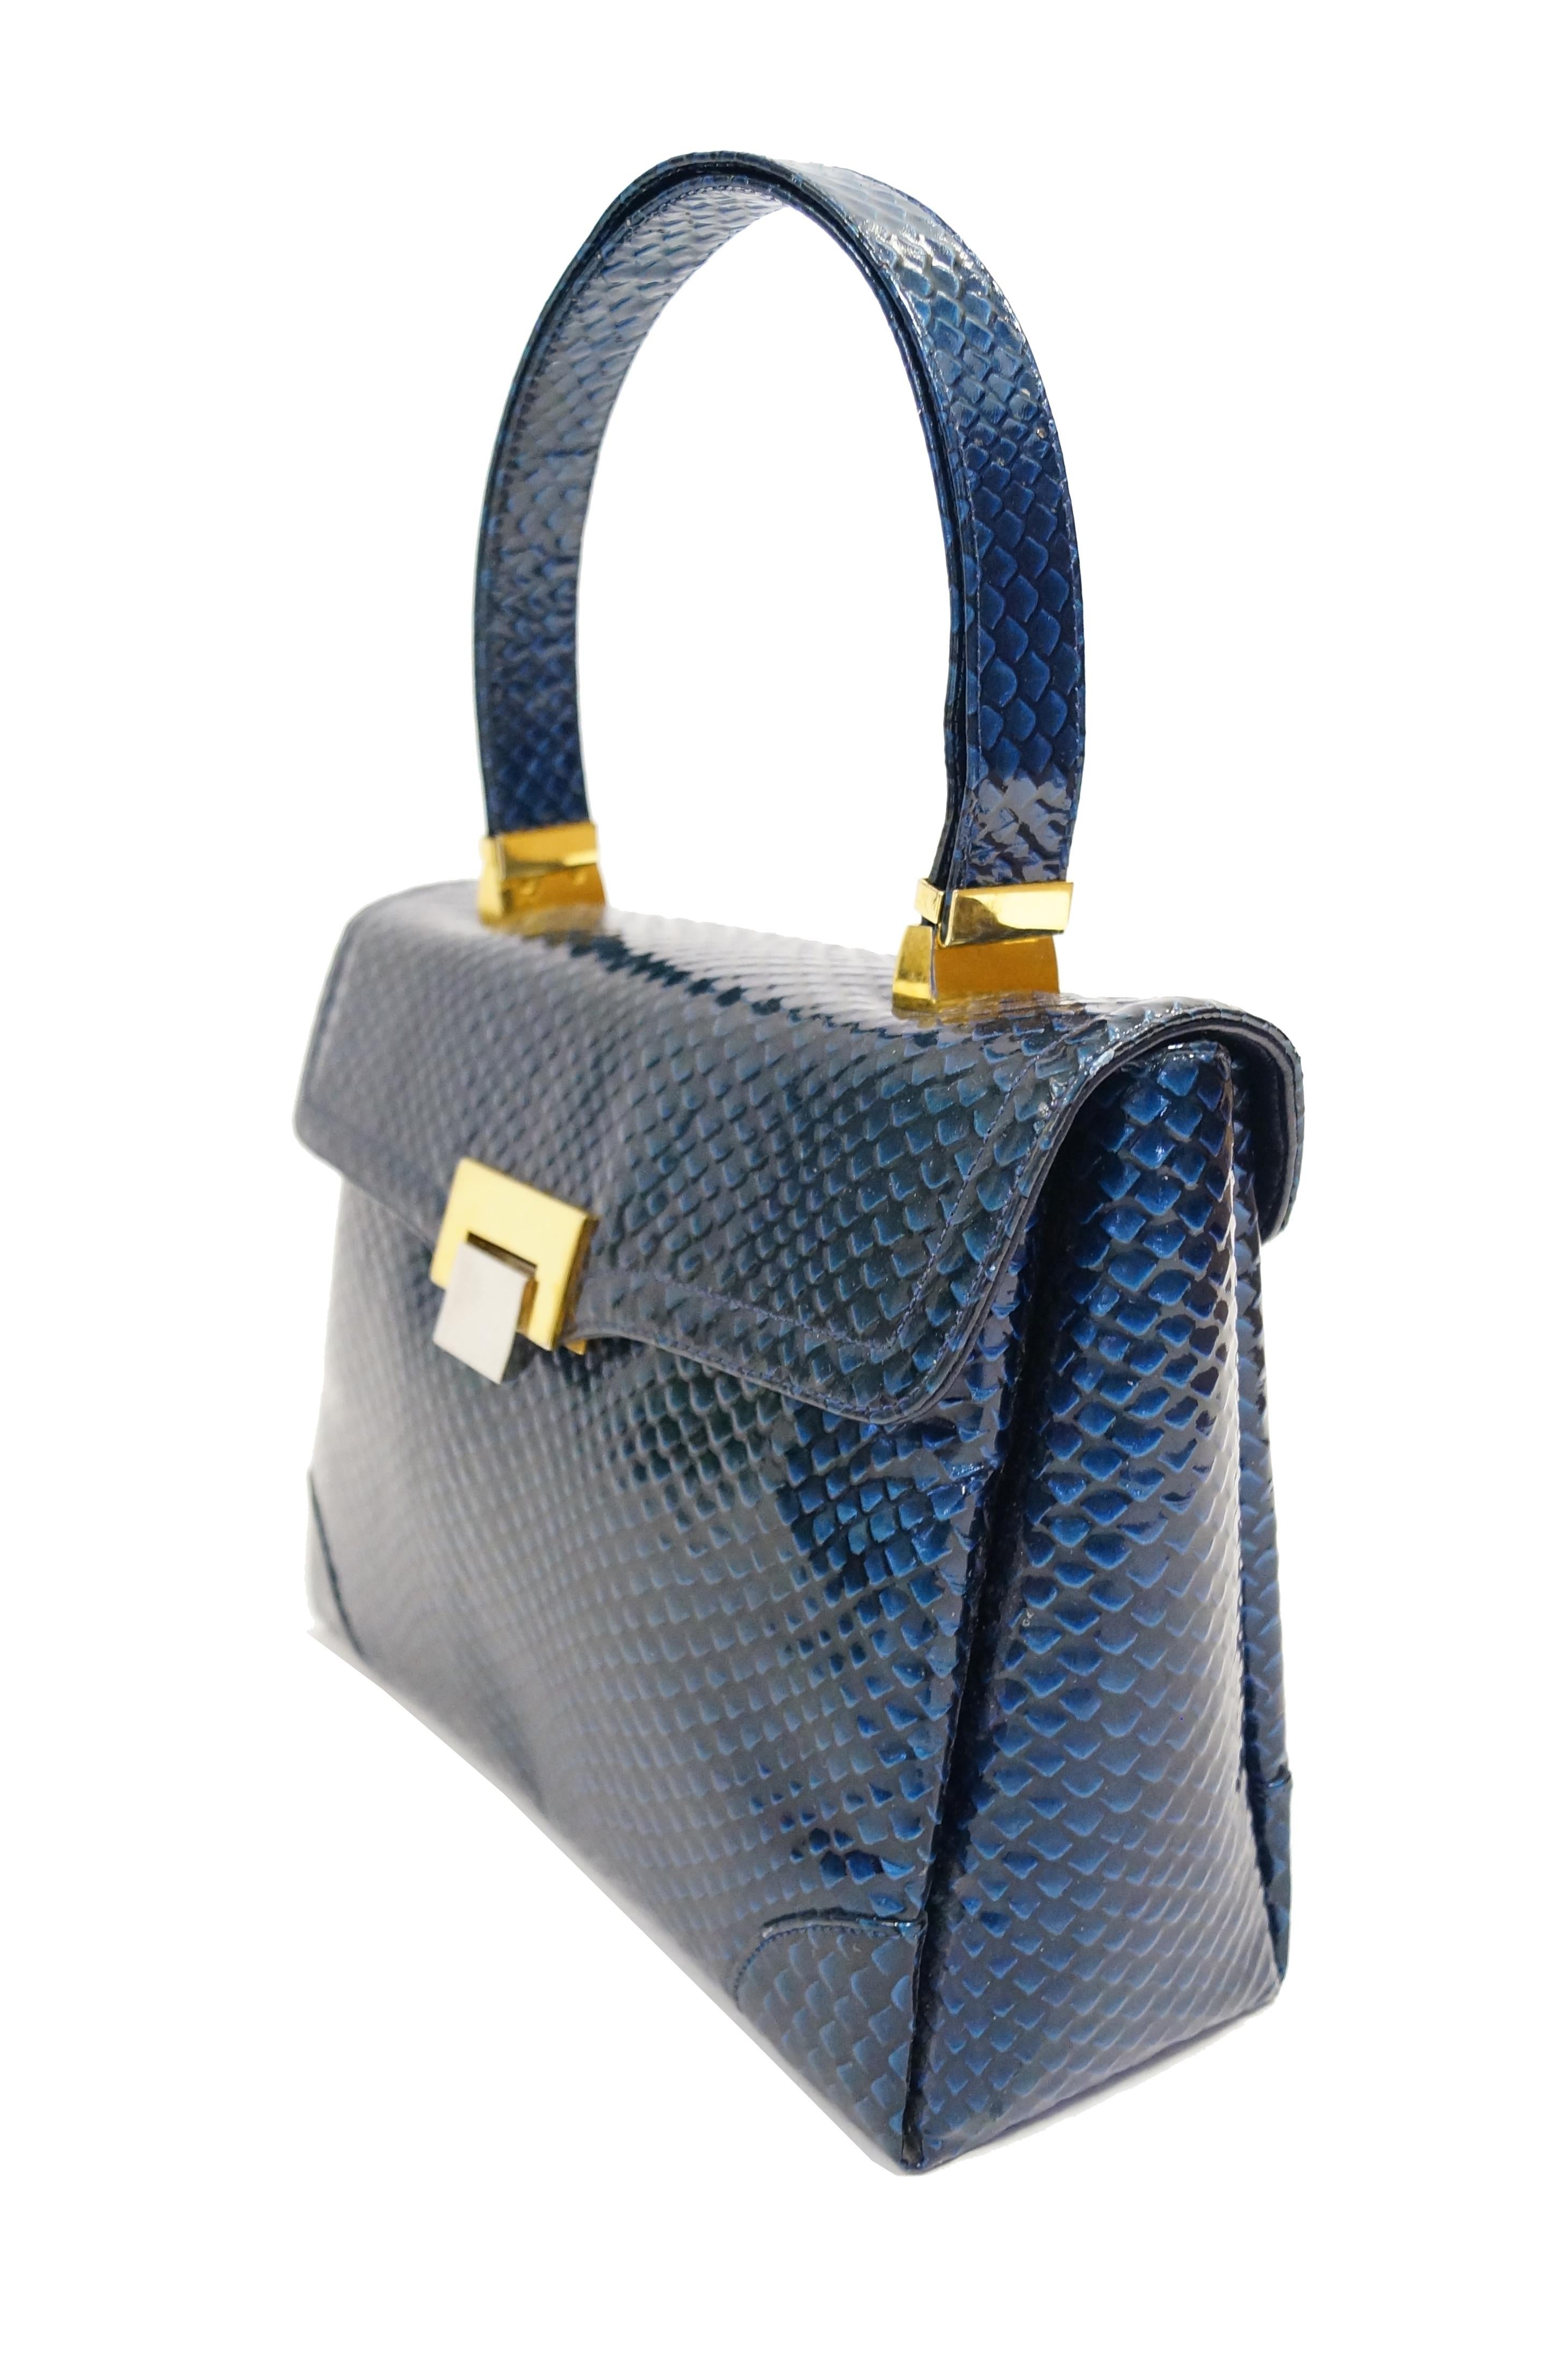 Amazing glossy blue reptile handbag by Koret! The handbag has an A-frame structure, with a rectangular silhouette and top handle. The handbag flap has a gold and silver tone flip lock closure, and the handle features gold tone hinges. The interior